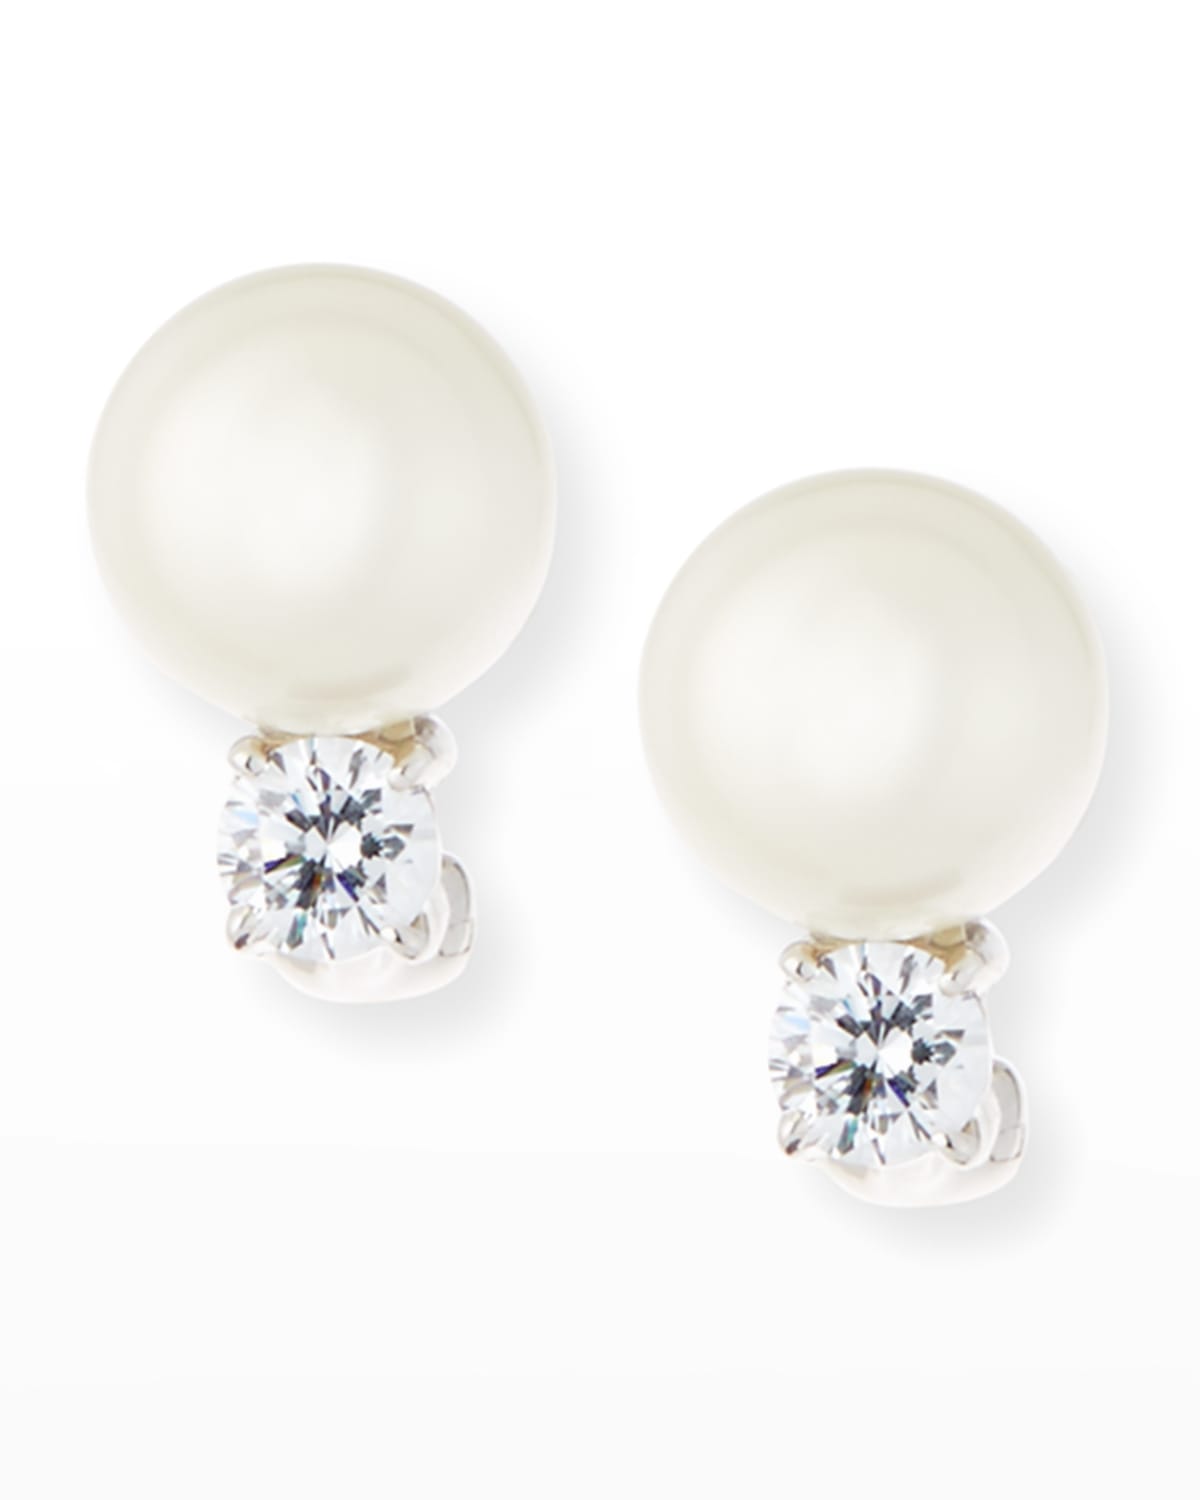 Fantasia by DeSerio 10mm Pearly Bead & Crystal Stud Earrings